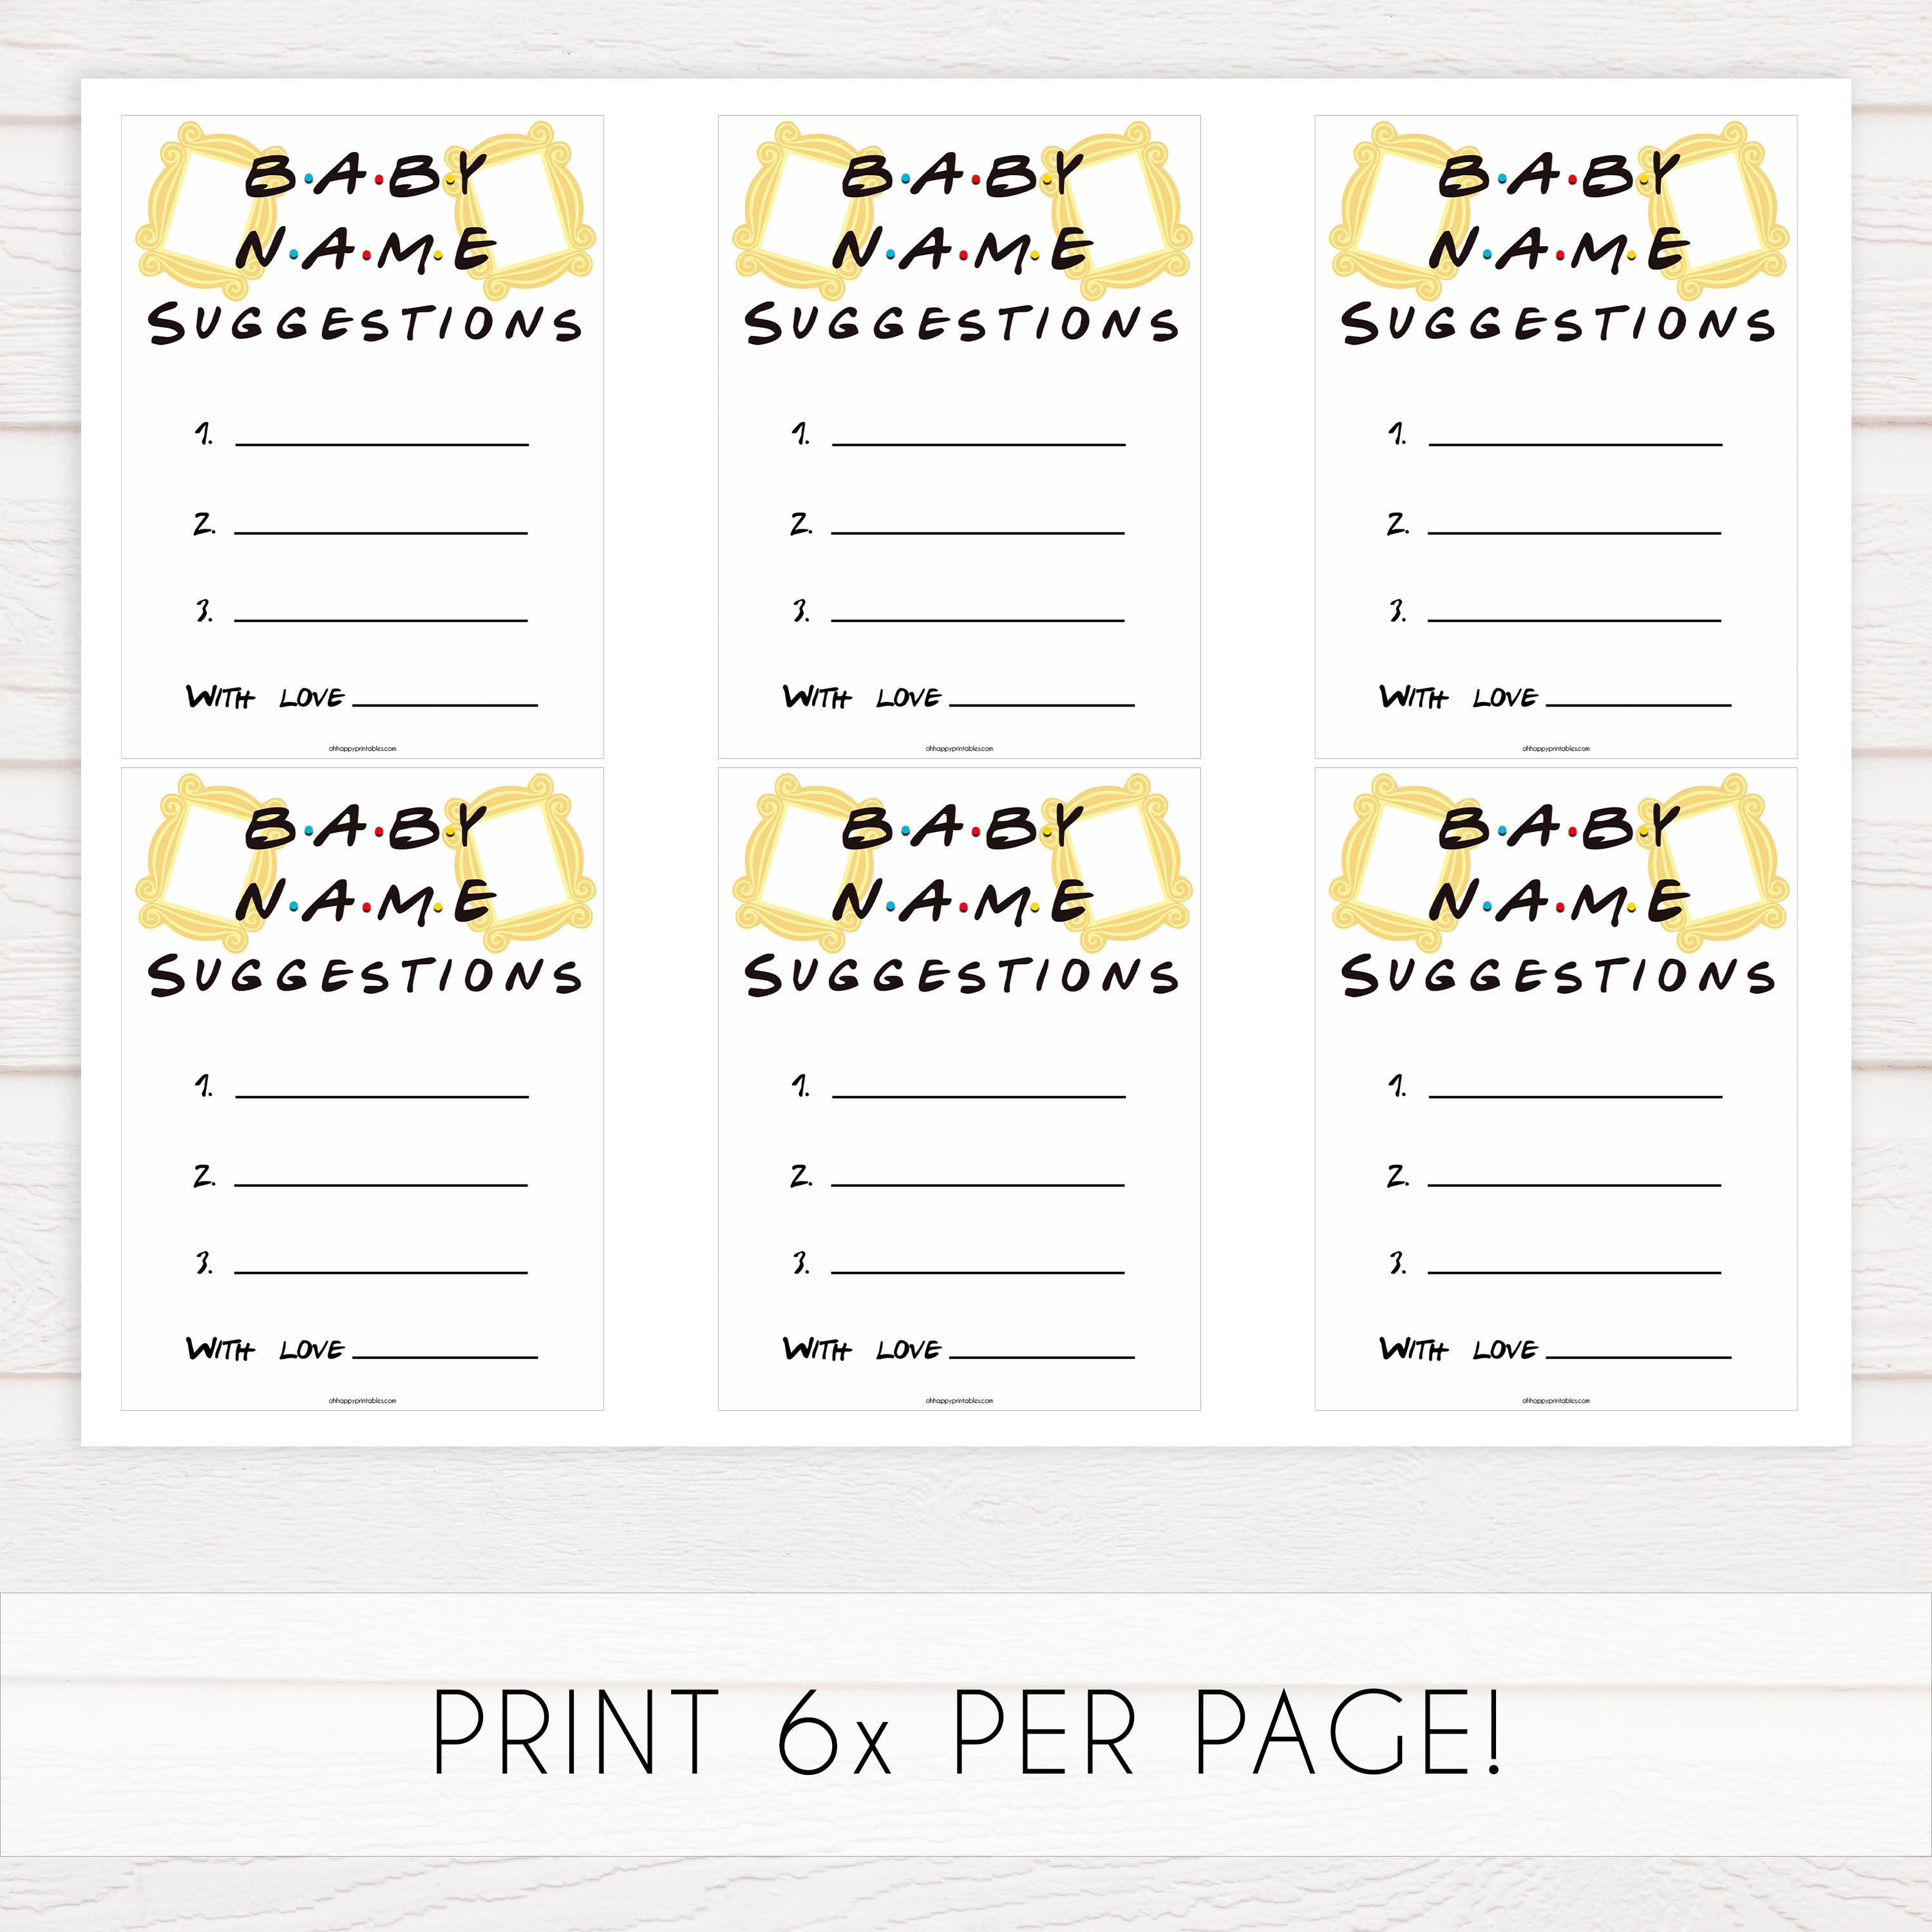 baby name suggestions, Printable baby shower games, friends fun baby games, baby shower games, fun baby shower ideas, top baby shower ideas, friends baby shower, friends baby shower ideas